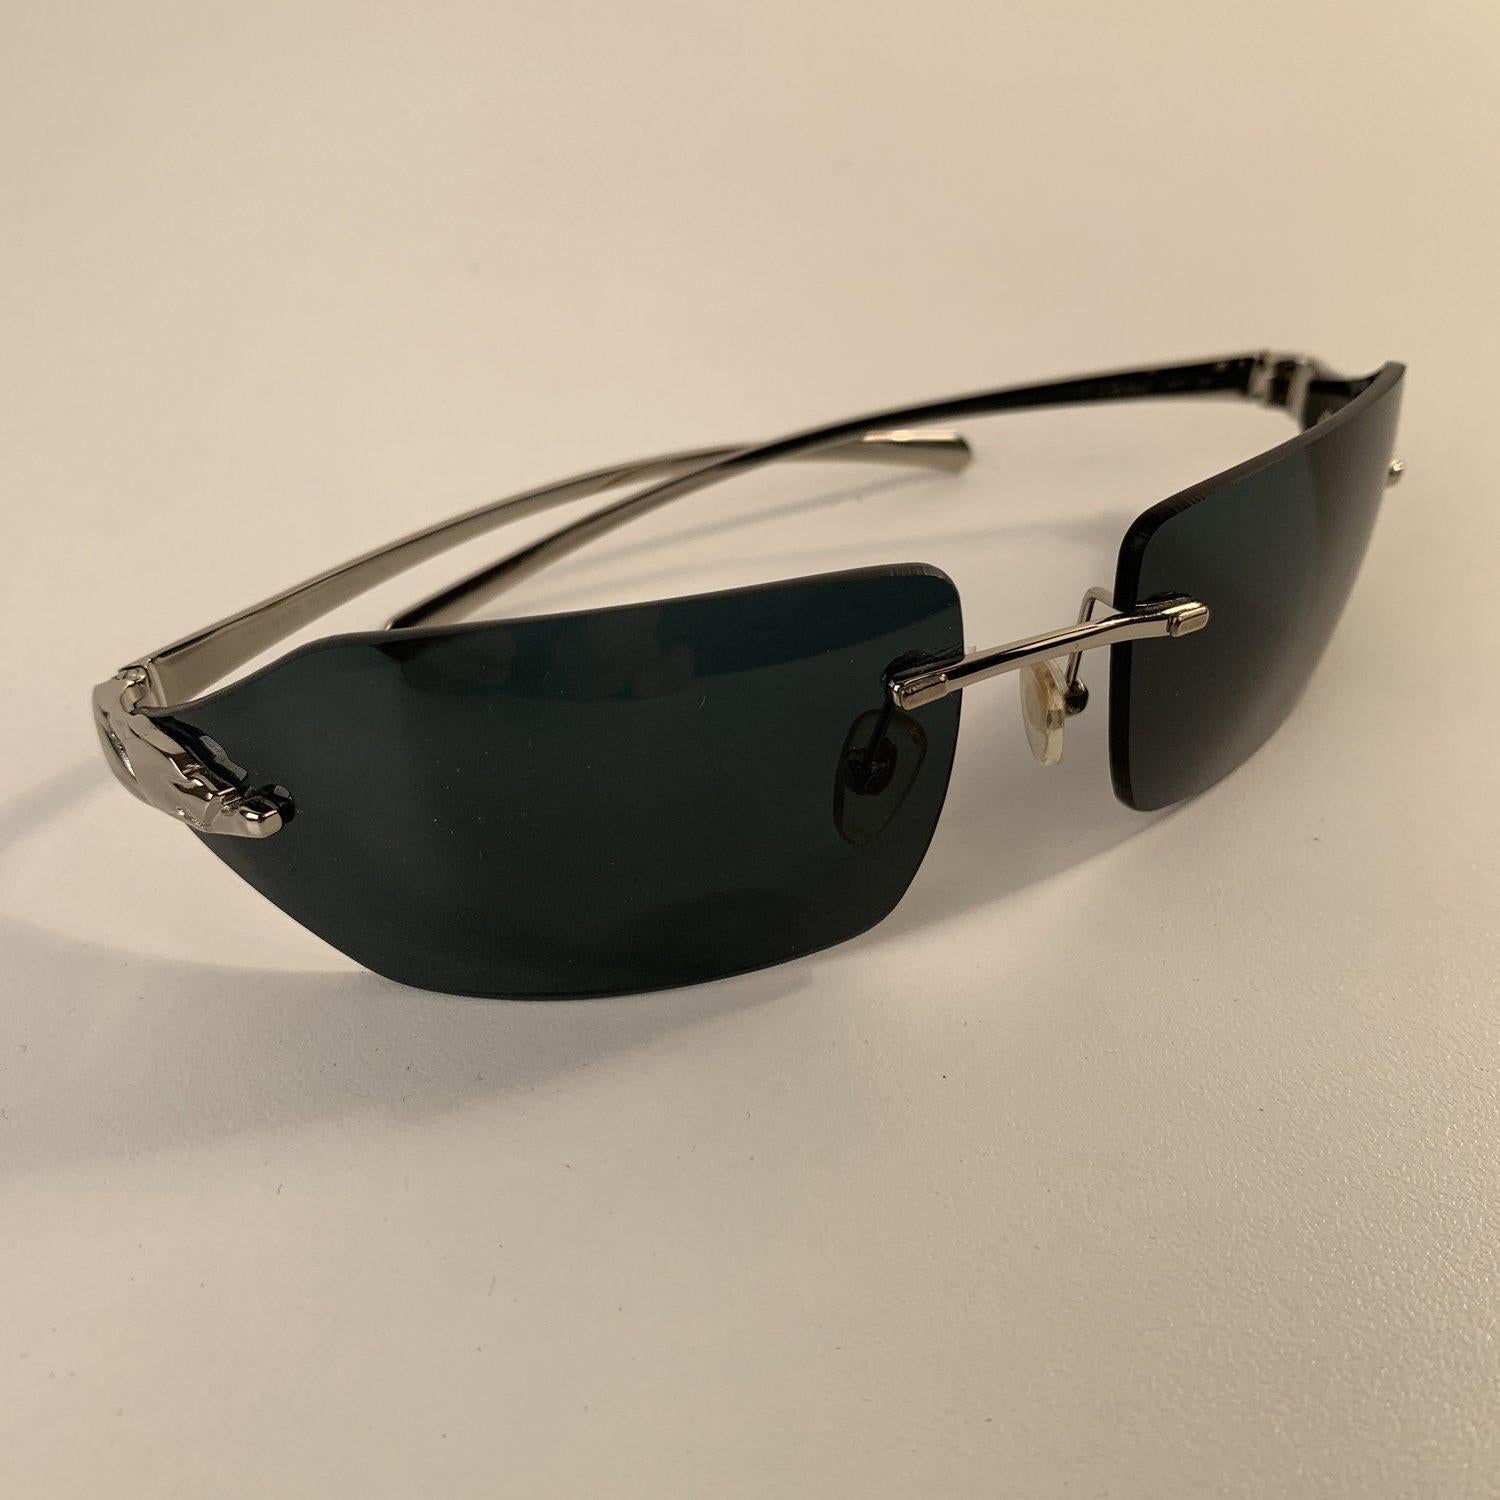 MATERIAL: Silver COLOR: Blue/Gray MODEL: Panthere GENDER: Adult Unisex SIZE: Medium Condition A+ - MINT Mint item. Never worn or used - they will come with a Generic case Measurements TEMPLE MAX. LENGTH: 110 mm EYE / LENS MAX. WIDTH: 65 mm EYE /